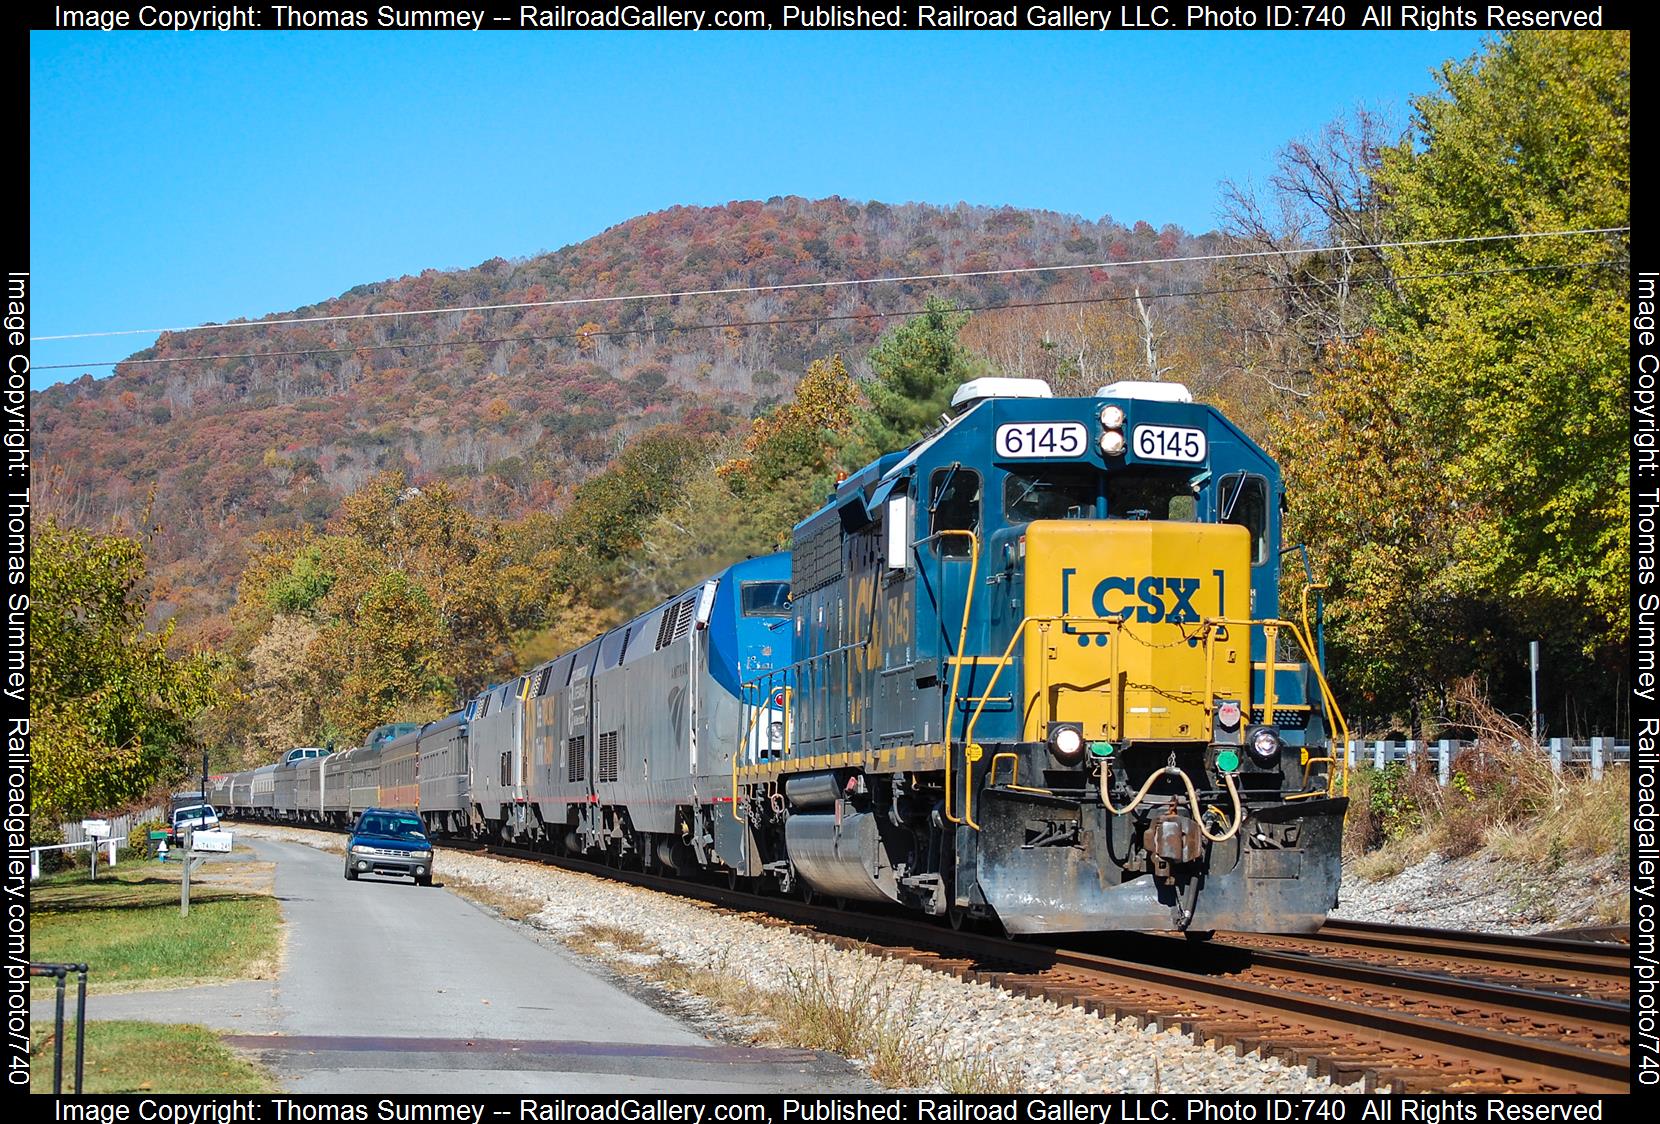 CSXT 6145 is a class EMD GP40-2 and  is pictured in Brooks, West Virginia, United States.  This was taken along the CSXT New River Subdivision on the CSX Transportation. Photo Copyright: Thomas Summey uploaded to Railroad Gallery on 02/23/2023. This photograph of CSXT 6145 was taken on Sunday, October 23, 2022. All Rights Reserved. 